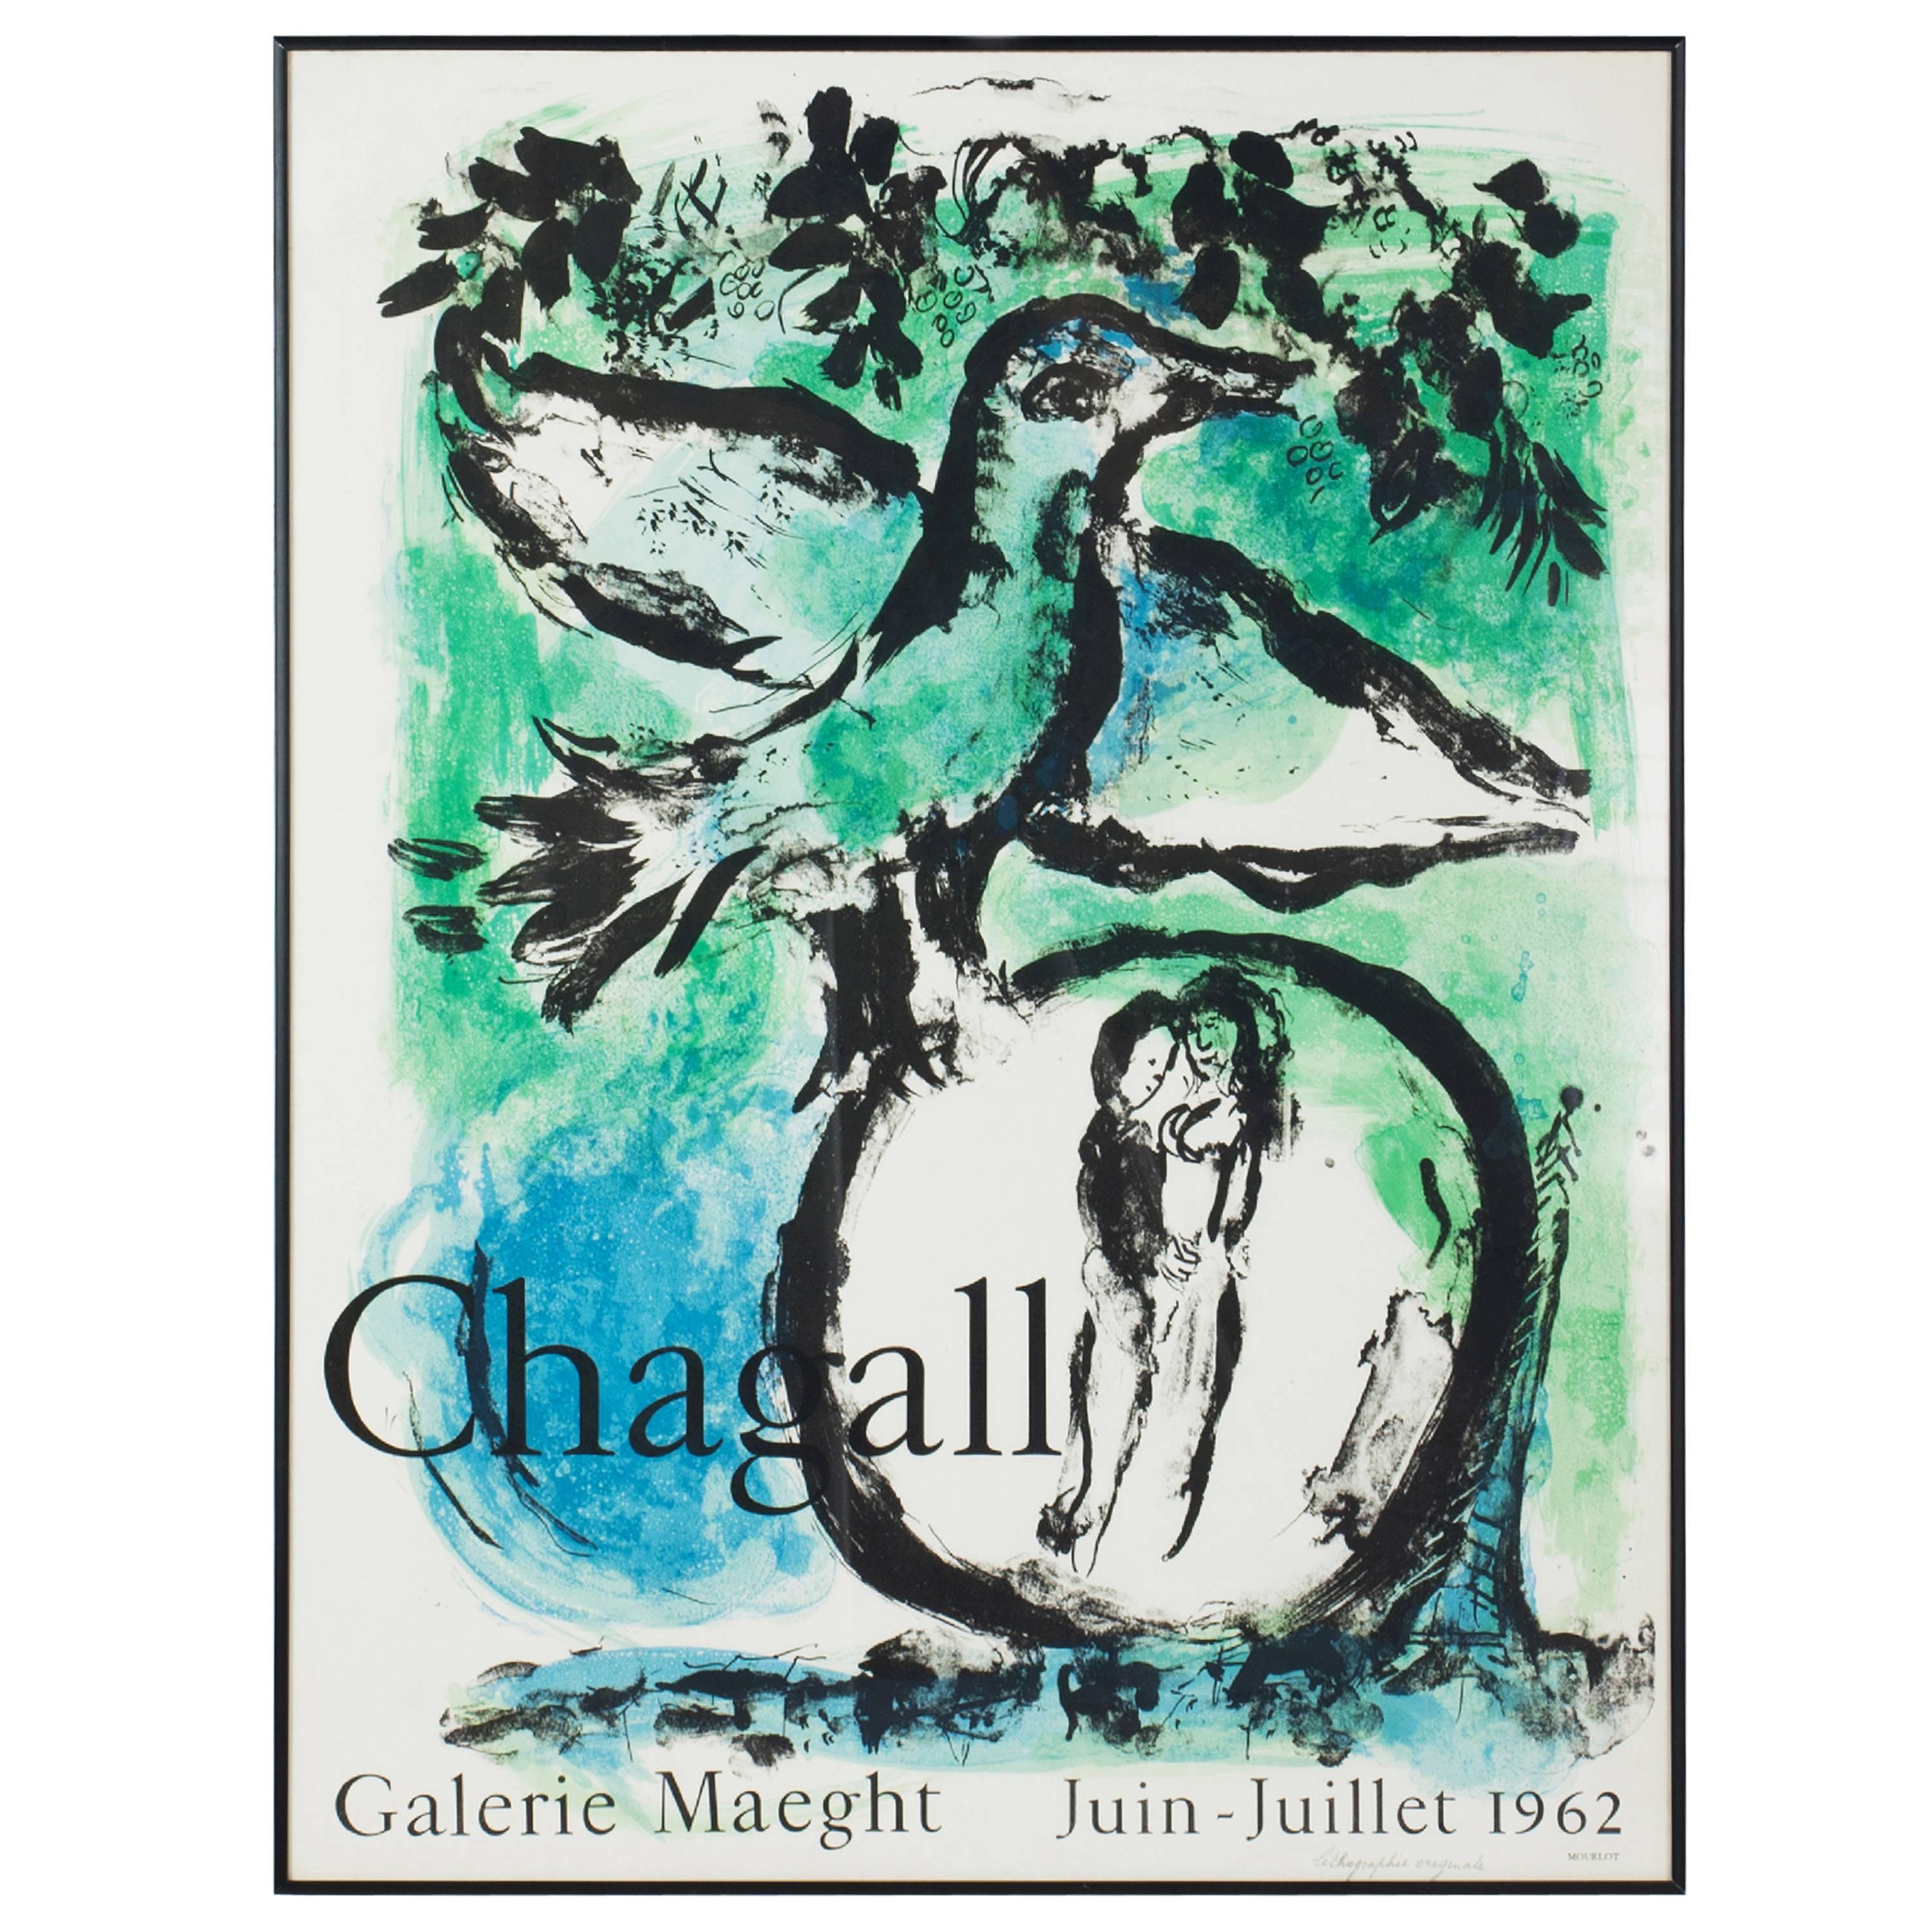 Marc Chagall Lithograph the Green Bird for Gallery Maeght, Paris, 1962